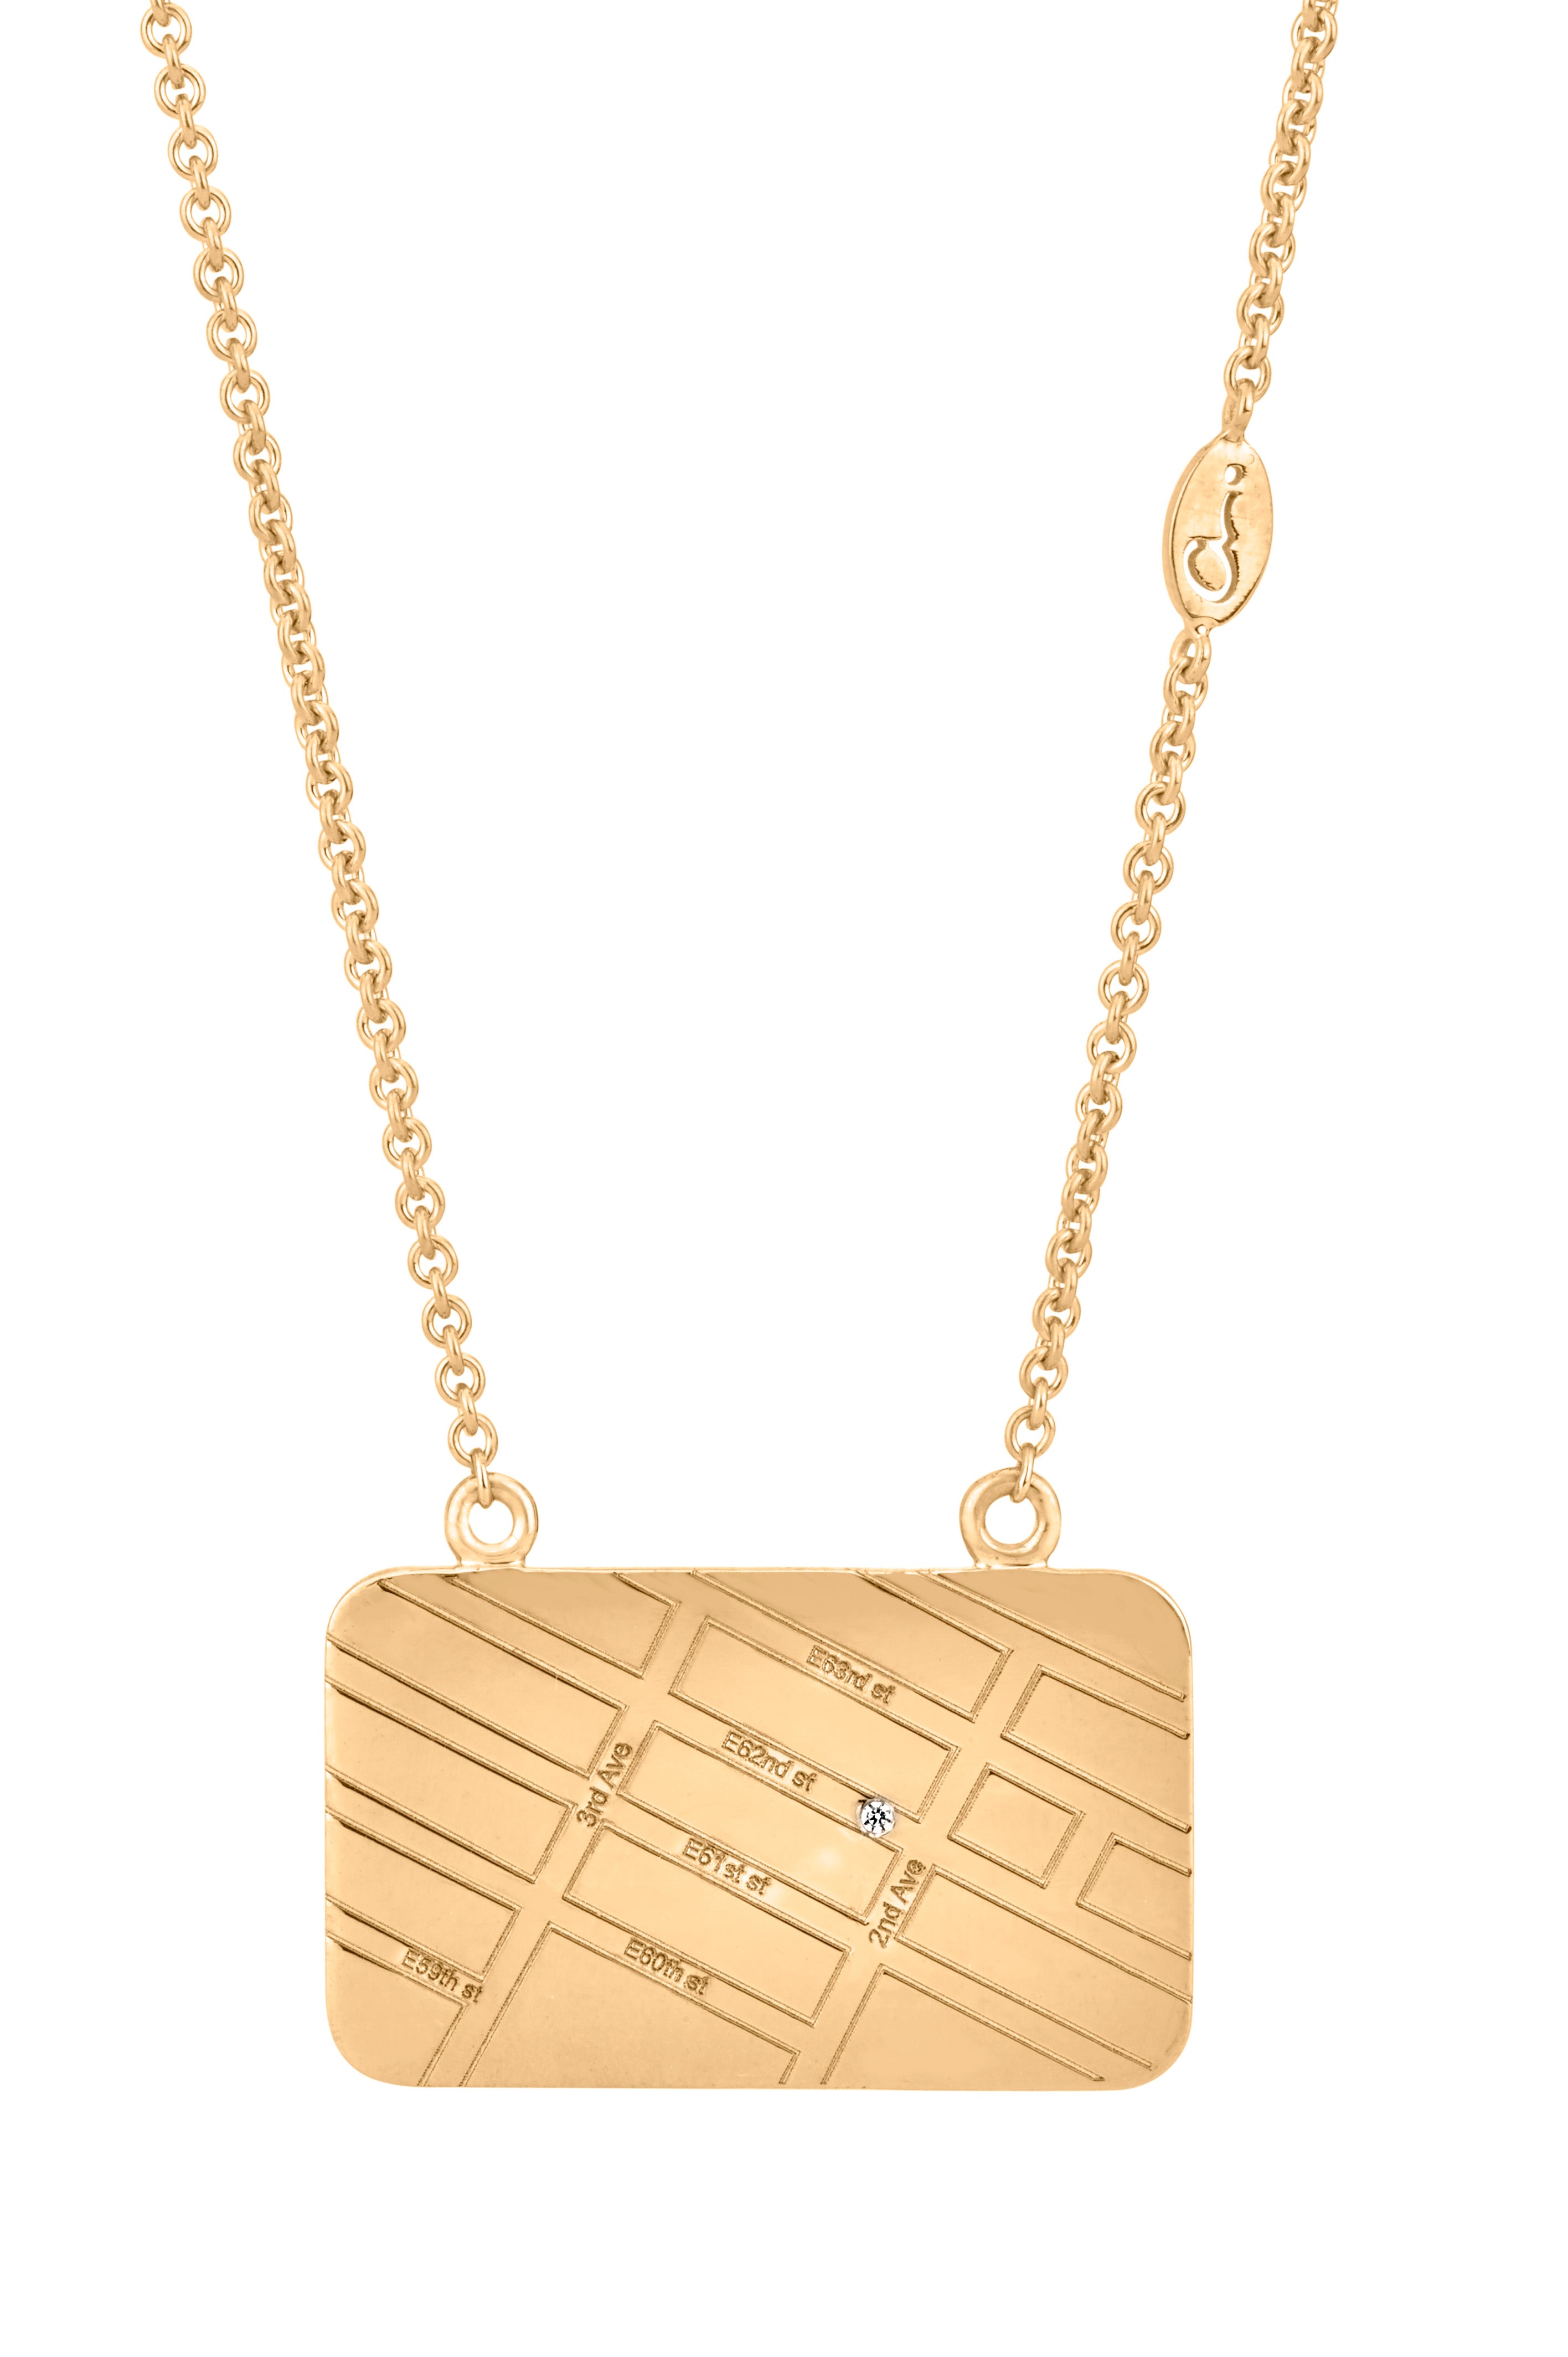 A.JAFFE  YELLOW GOLD MAP NECKLACE